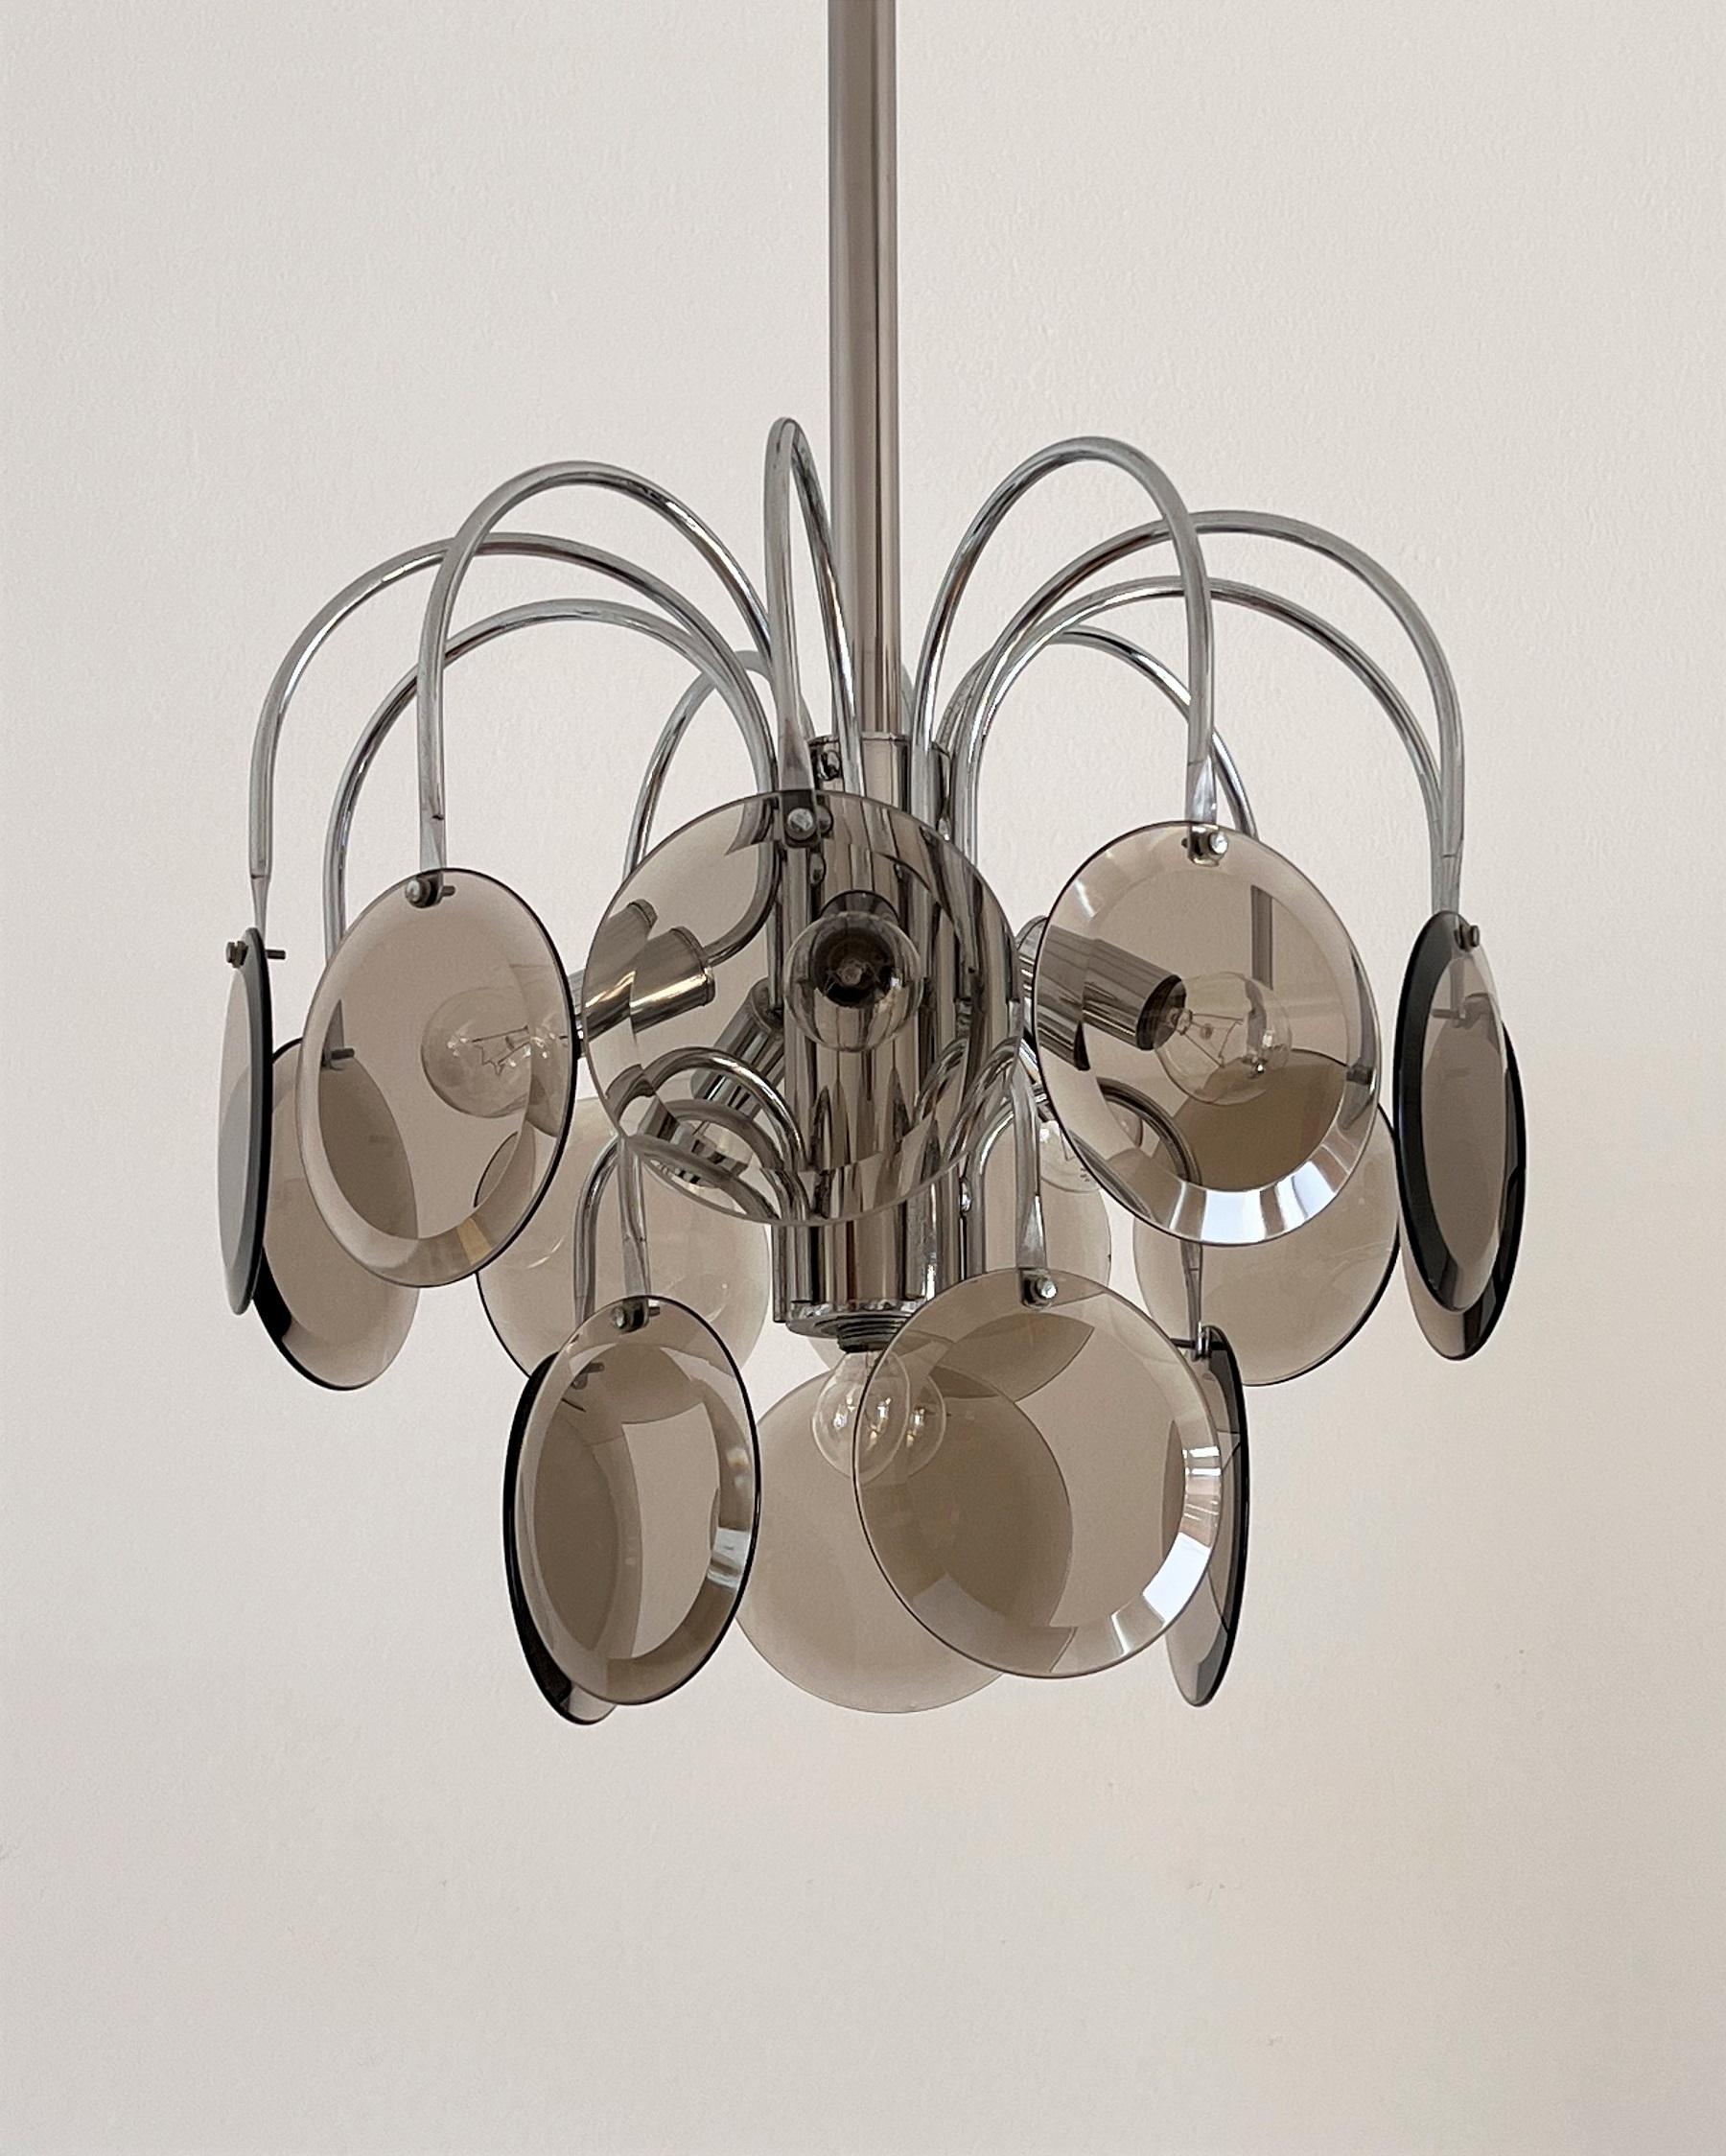 Stunning original chandelier back from the 1970s, Made in Italy.
Strong chrome base with some patina and vintage spots, holding 15 Murano glass discs with cut glass edges in smoked, light brown transparent color. Leave beautiful shadows.
The discs